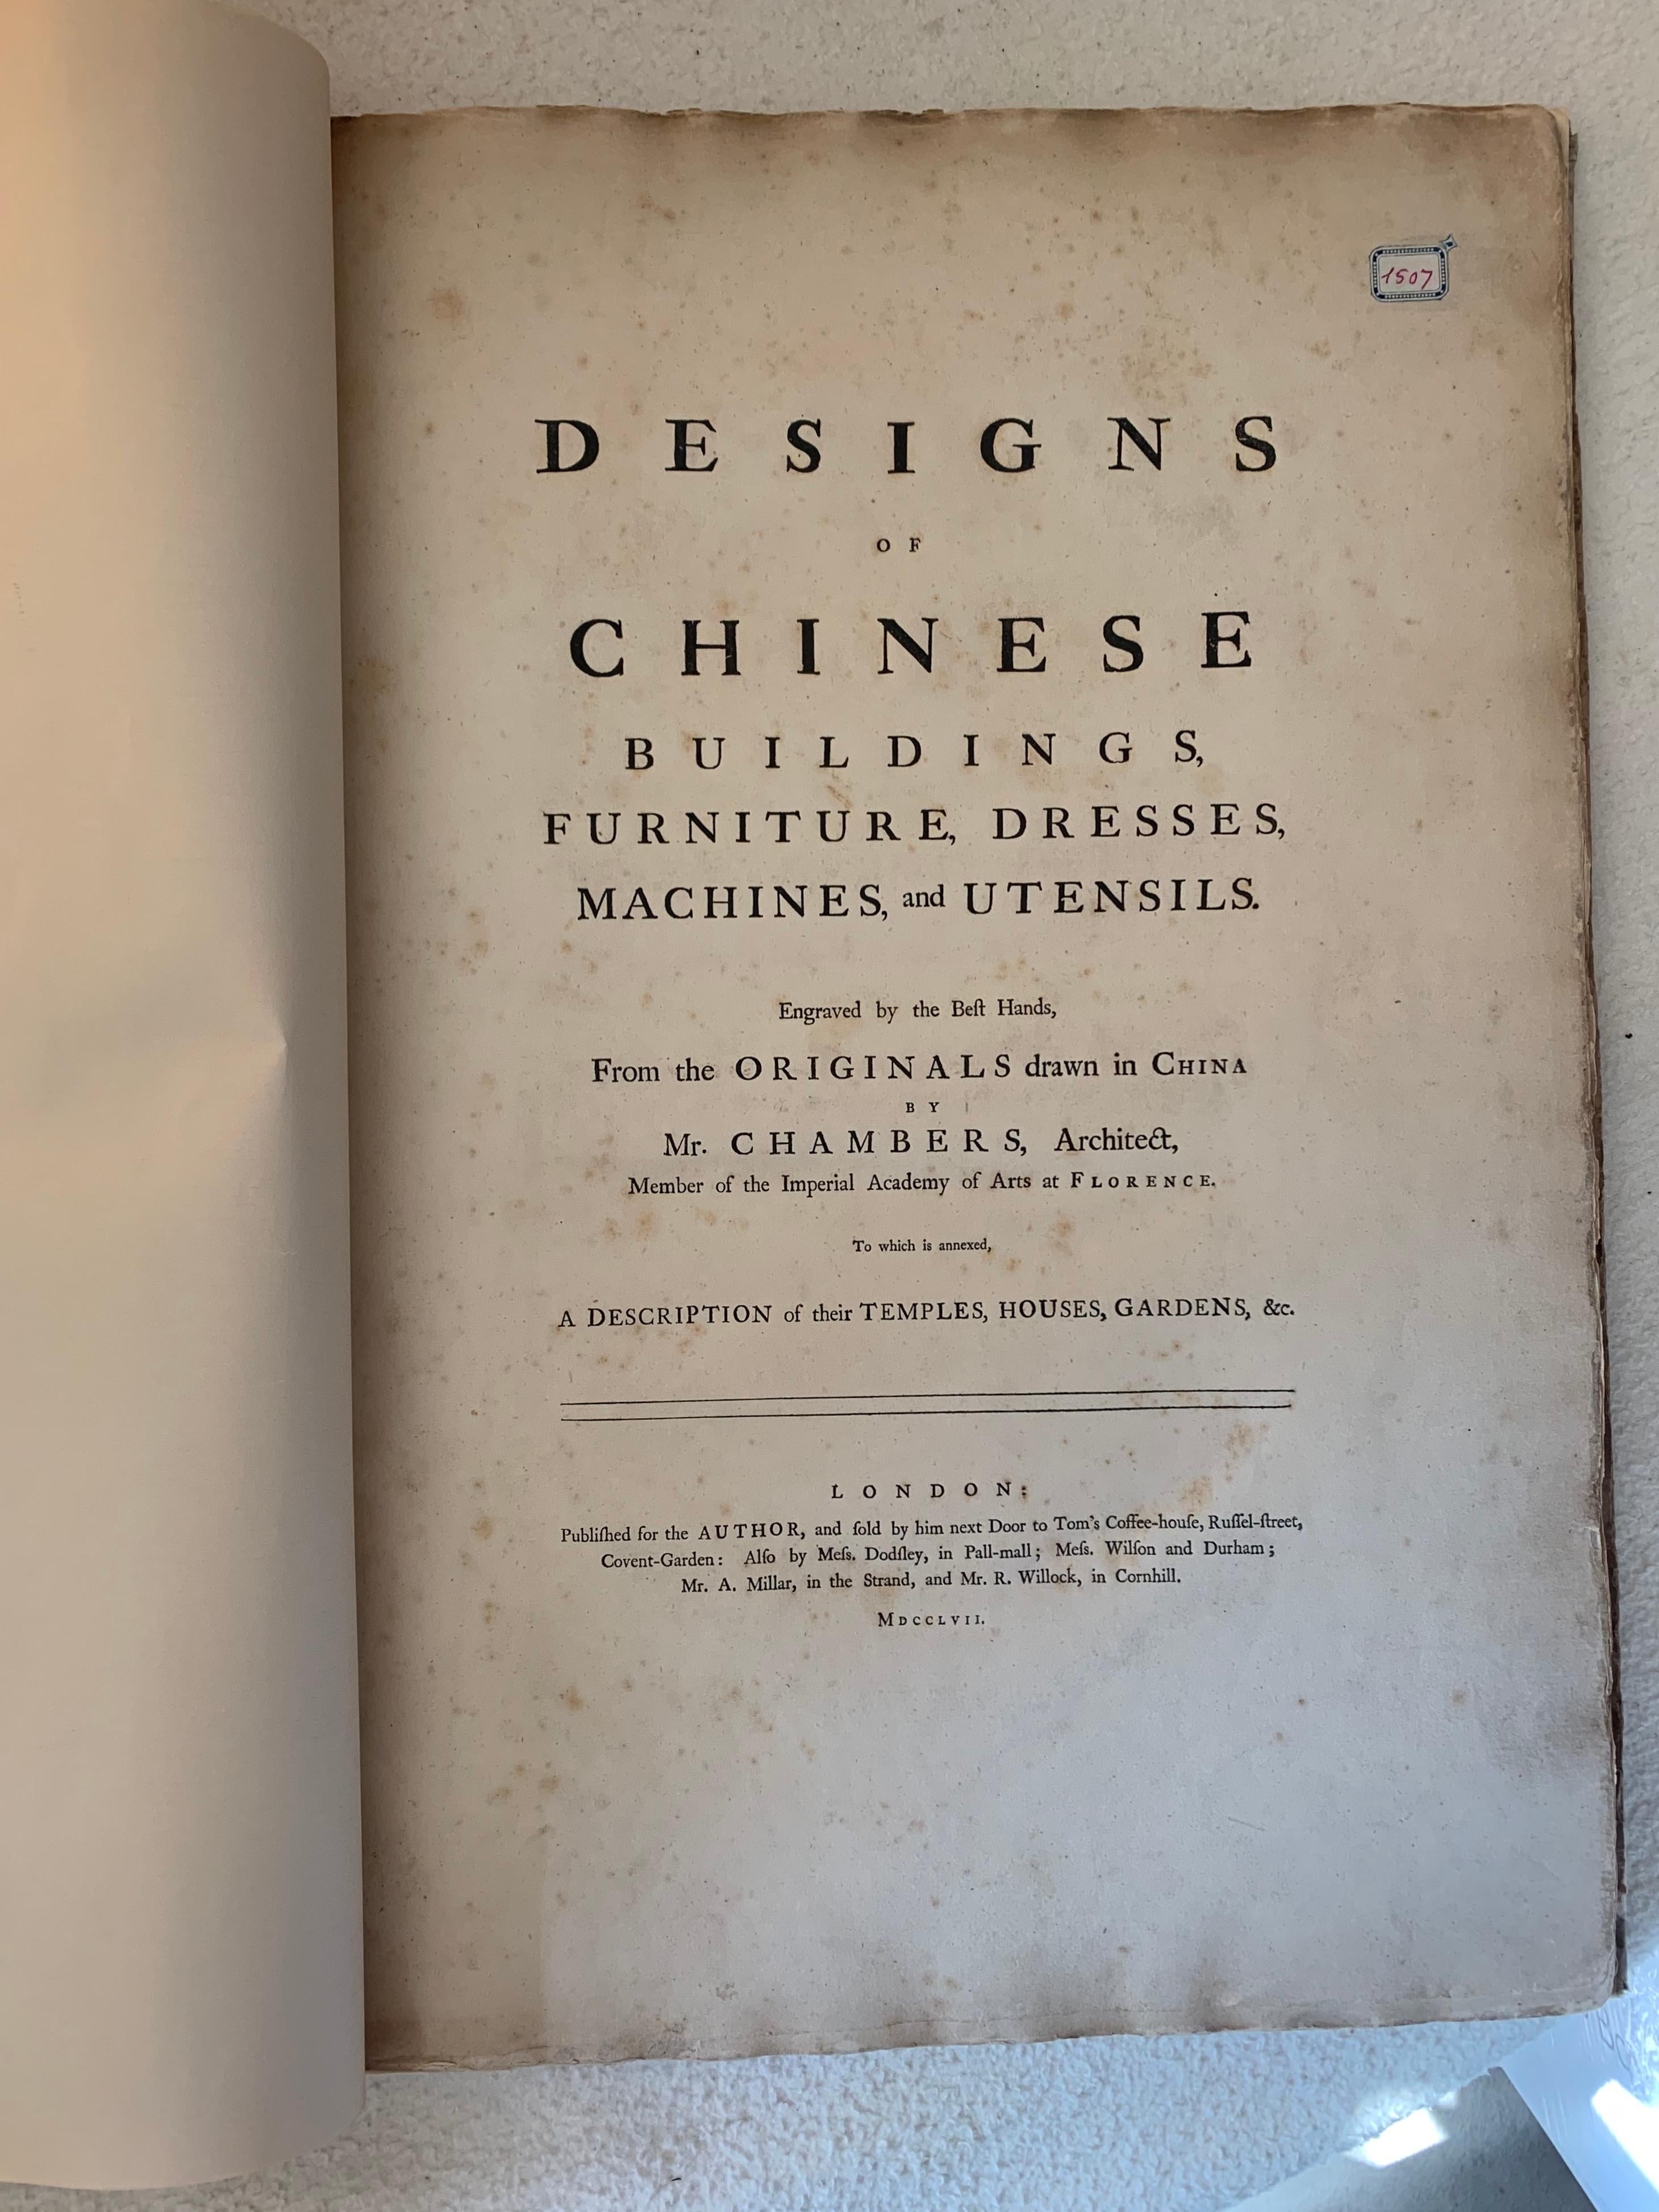 Chambers, Sir William. Designs of Chinese buildings, furniture, dresses etc. Designs of Chinese buildings, furniture, dresses, machines, and utensils. London: for the Author, Messrs. Dodsley, and others, 1757. Rare and complete bound original of